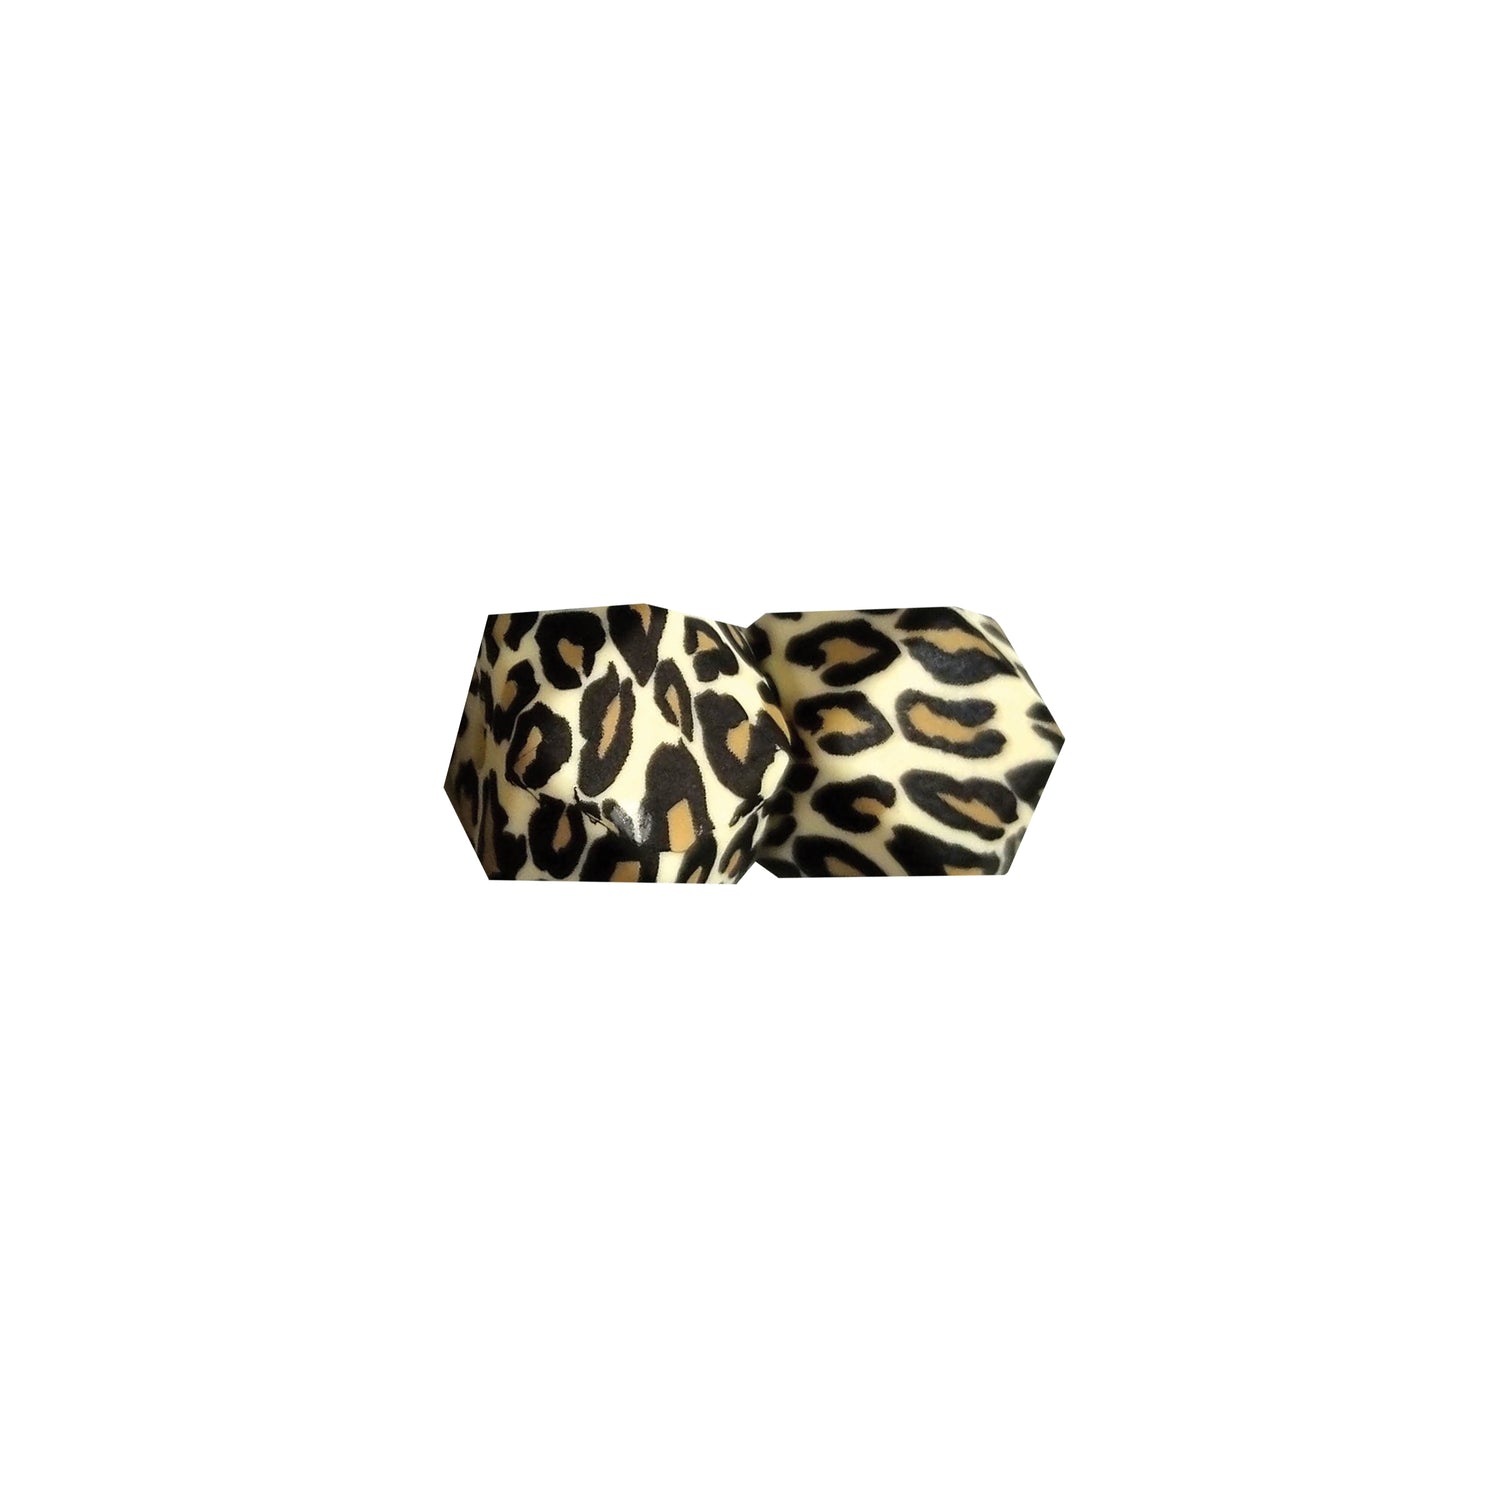 17mm leopard print hexagon silicone beads